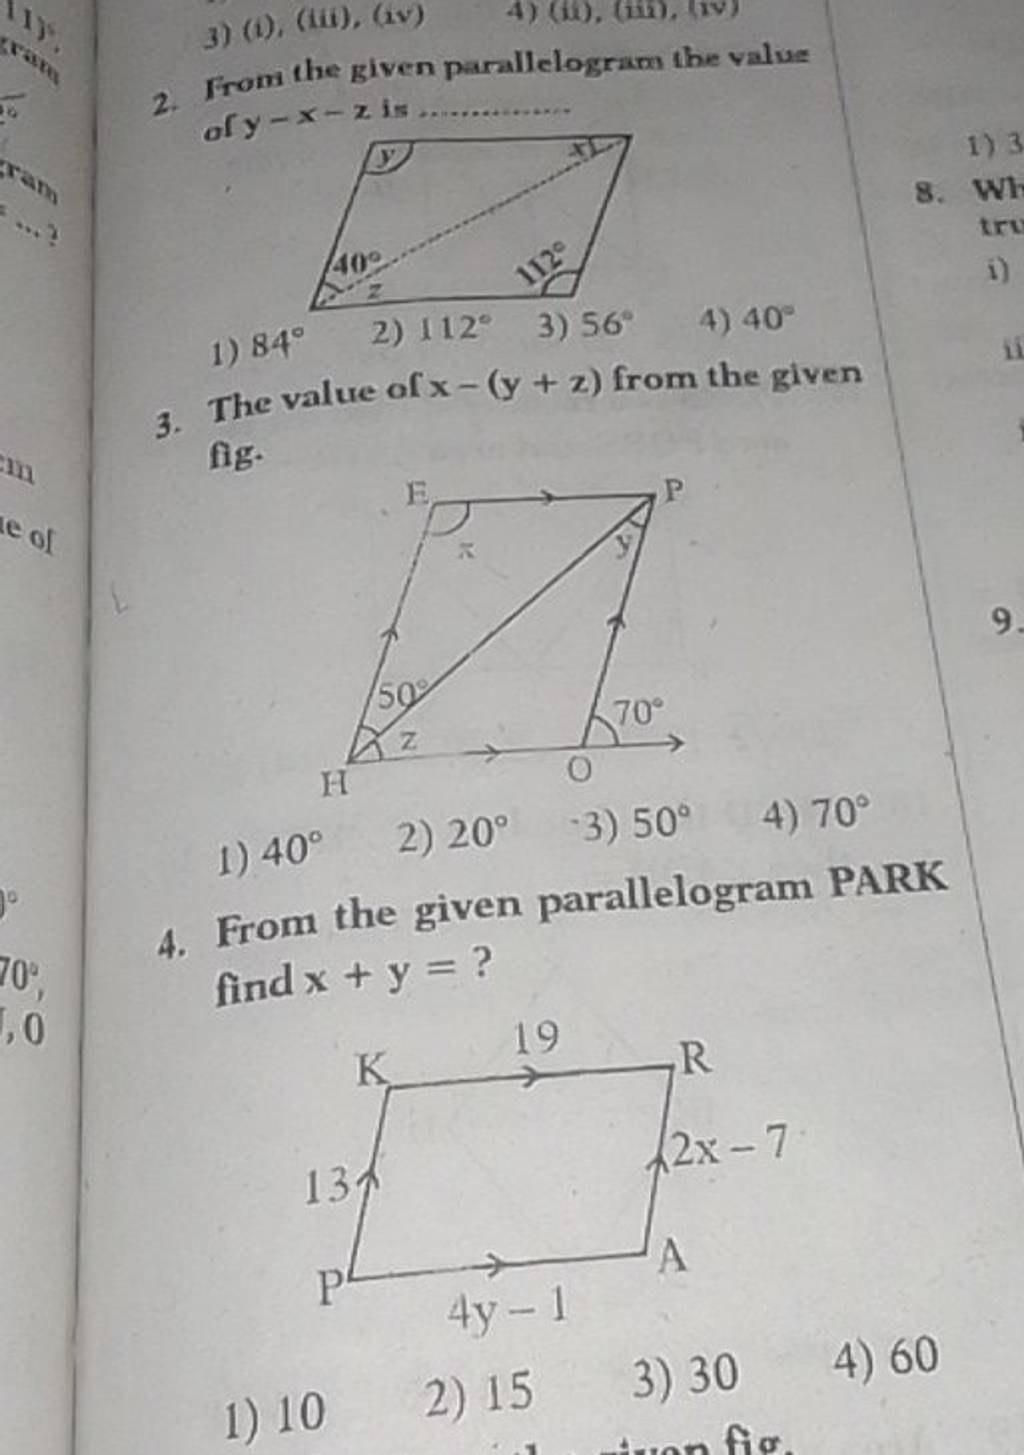 2. From the given parallelogram the value
4) 40∘
3. The value of x−(y+